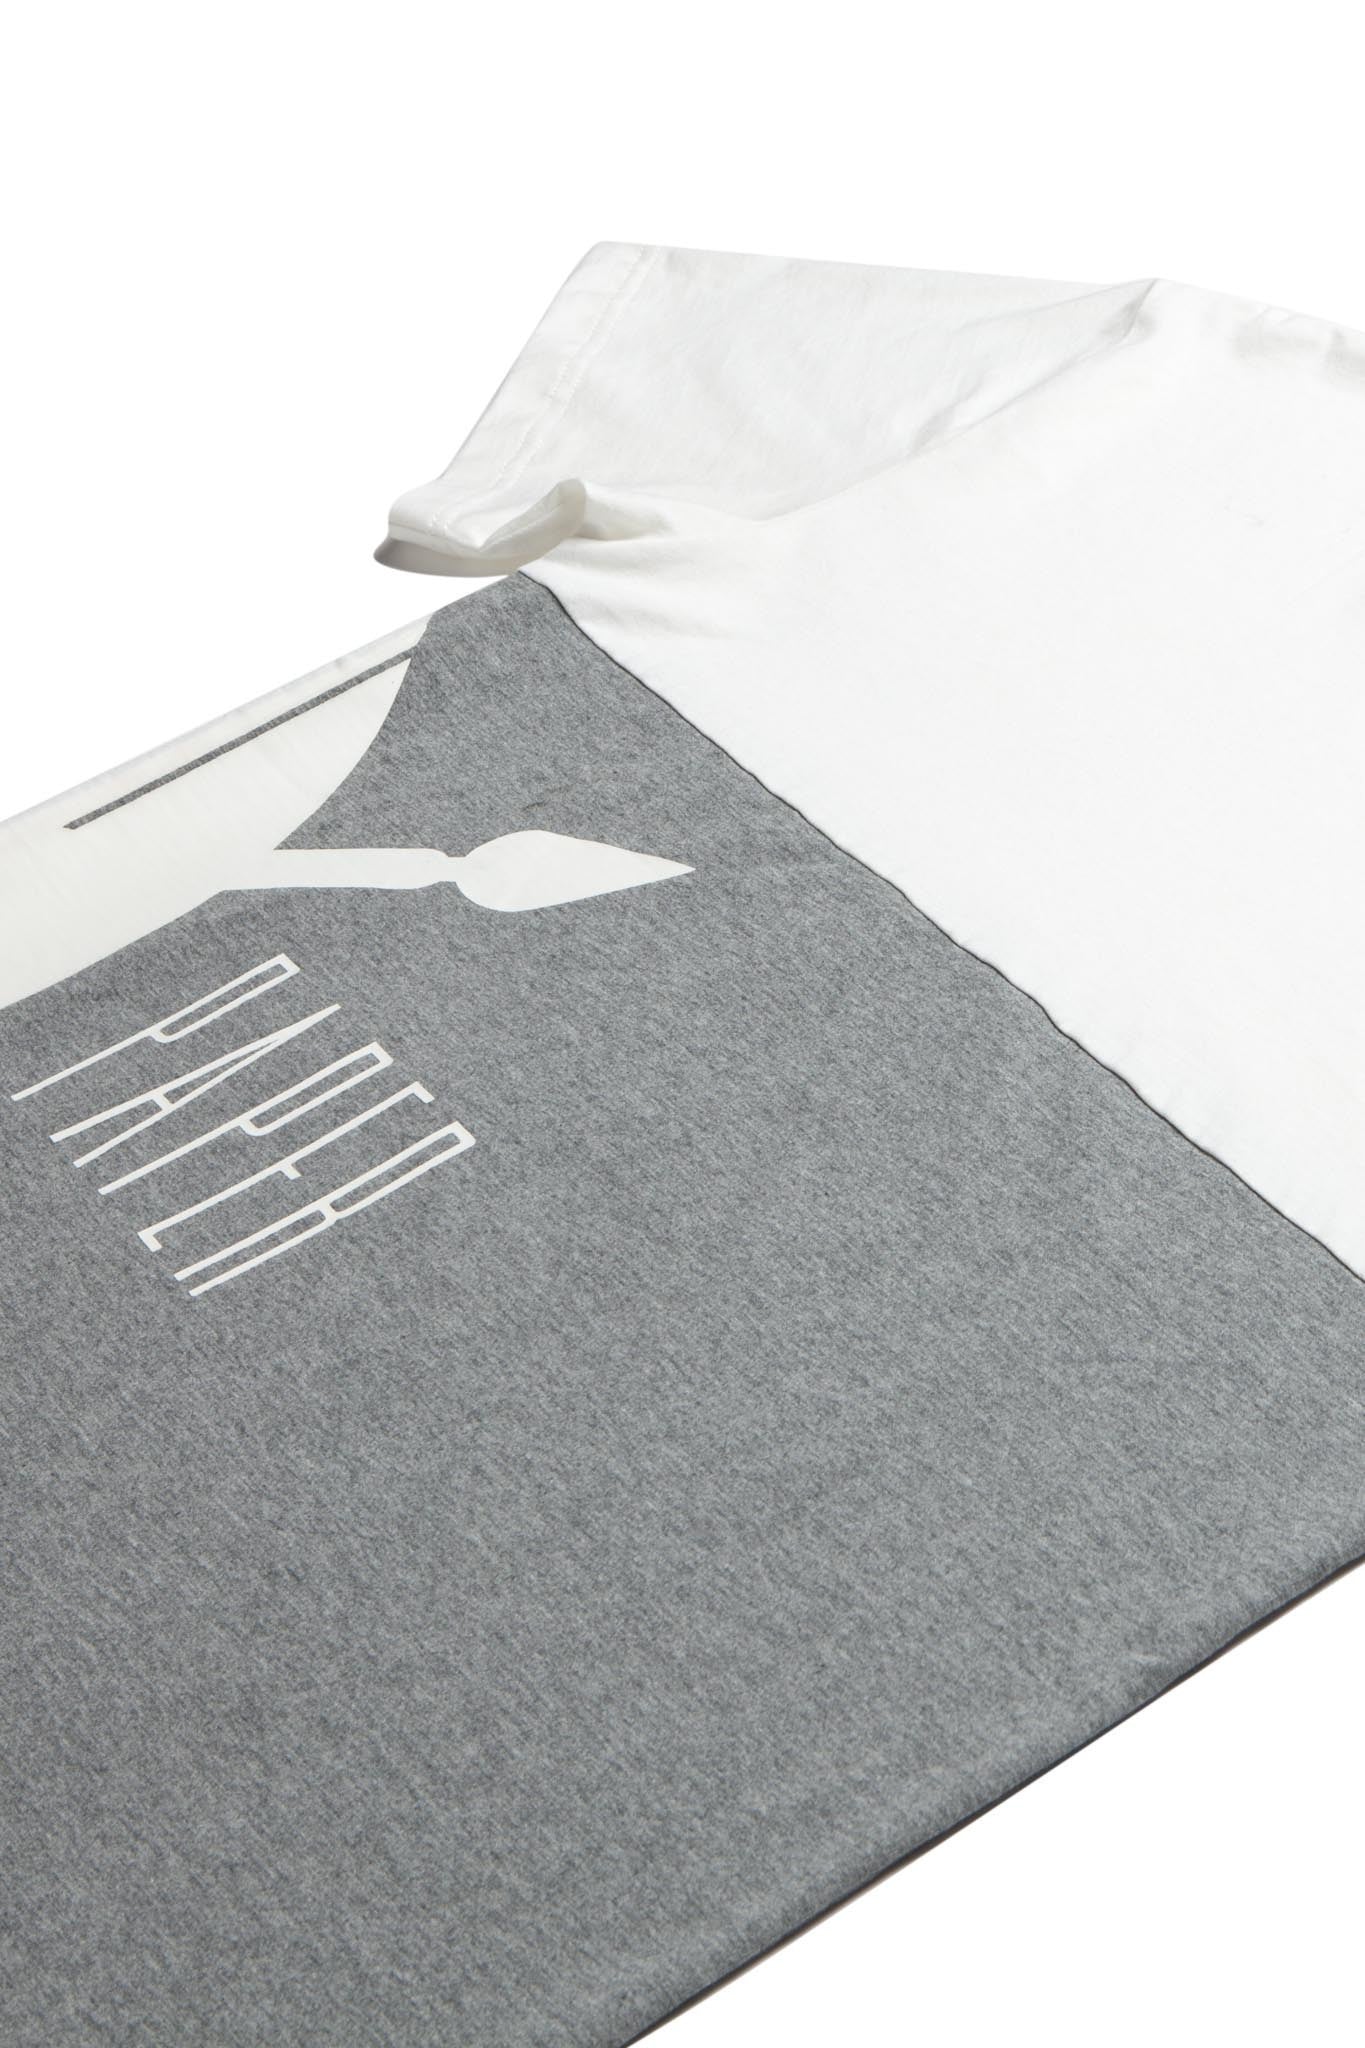 Daily Paper Side Logo T-Shirt